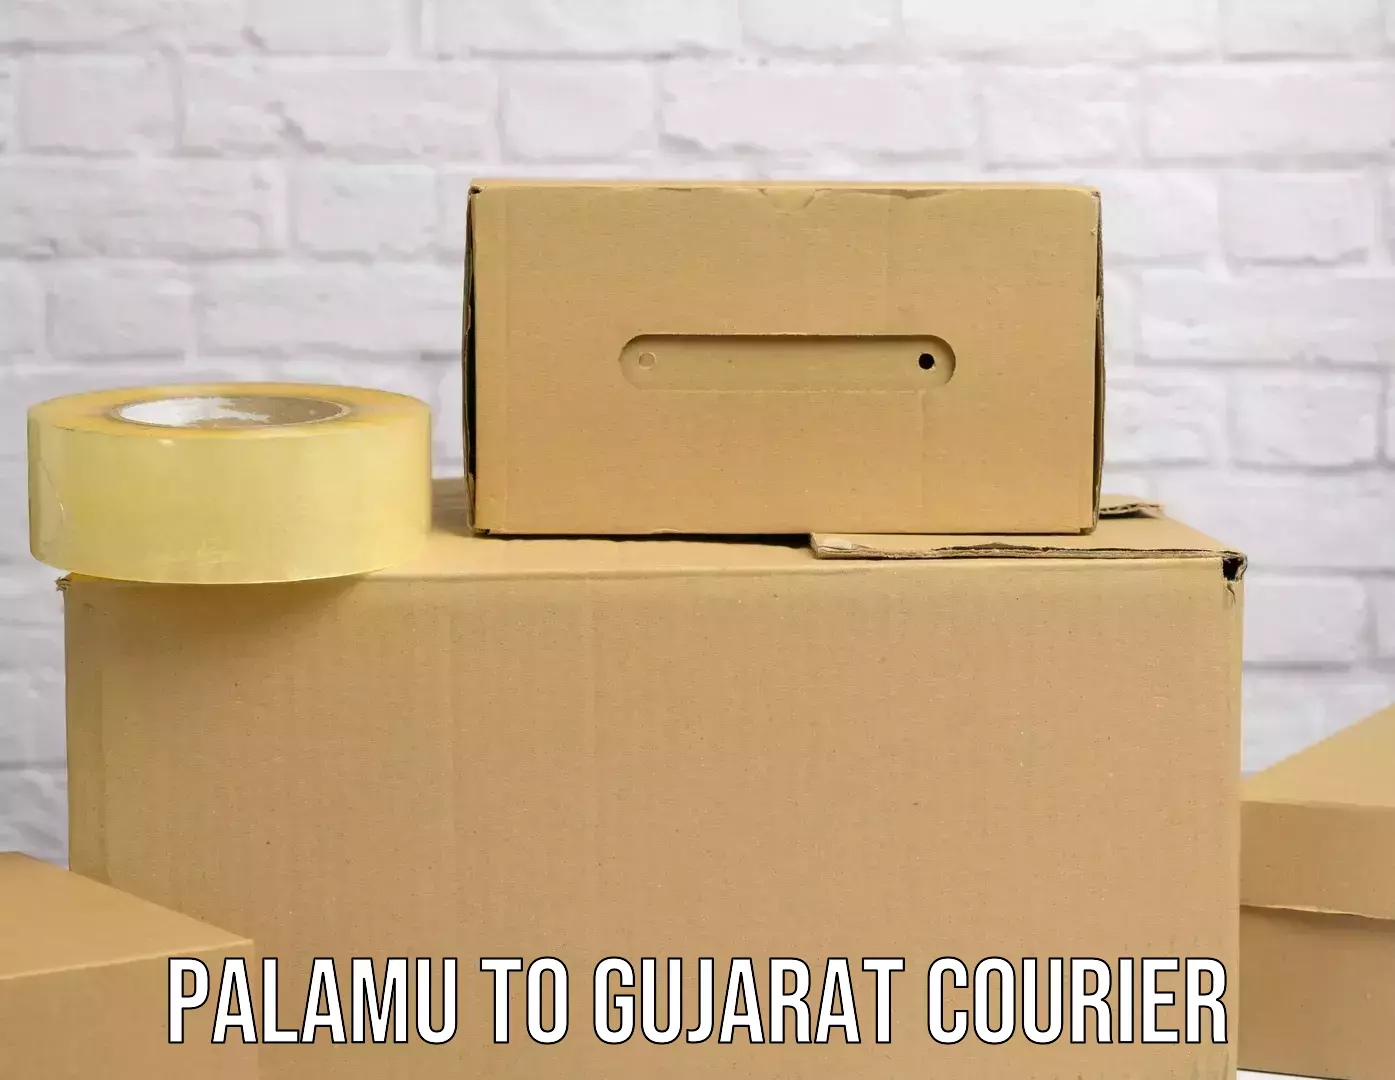 Fast delivery service in Palamu to Palitana